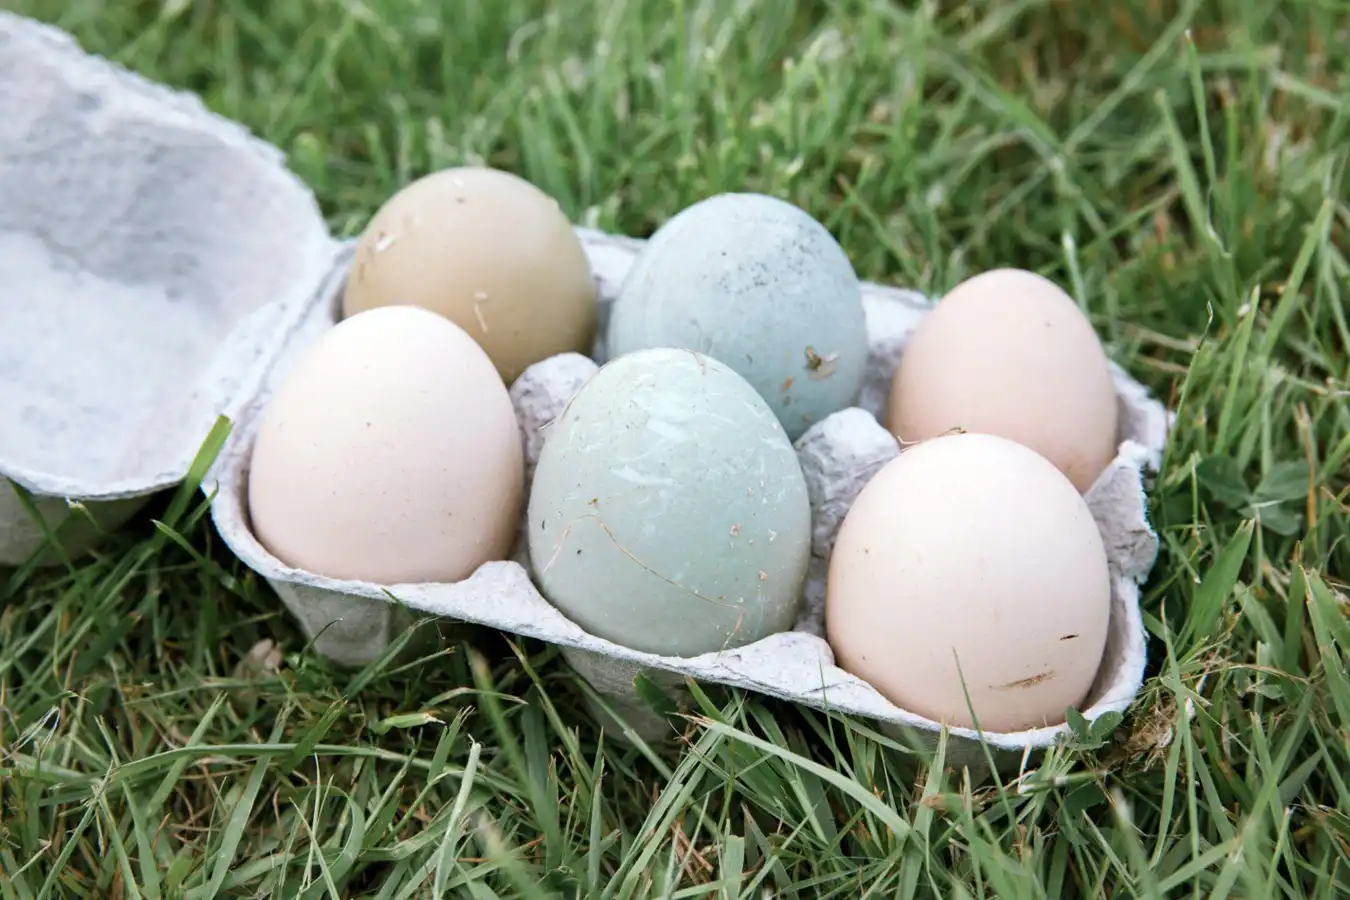 Learn How to Keep Eggs Cold While Camping